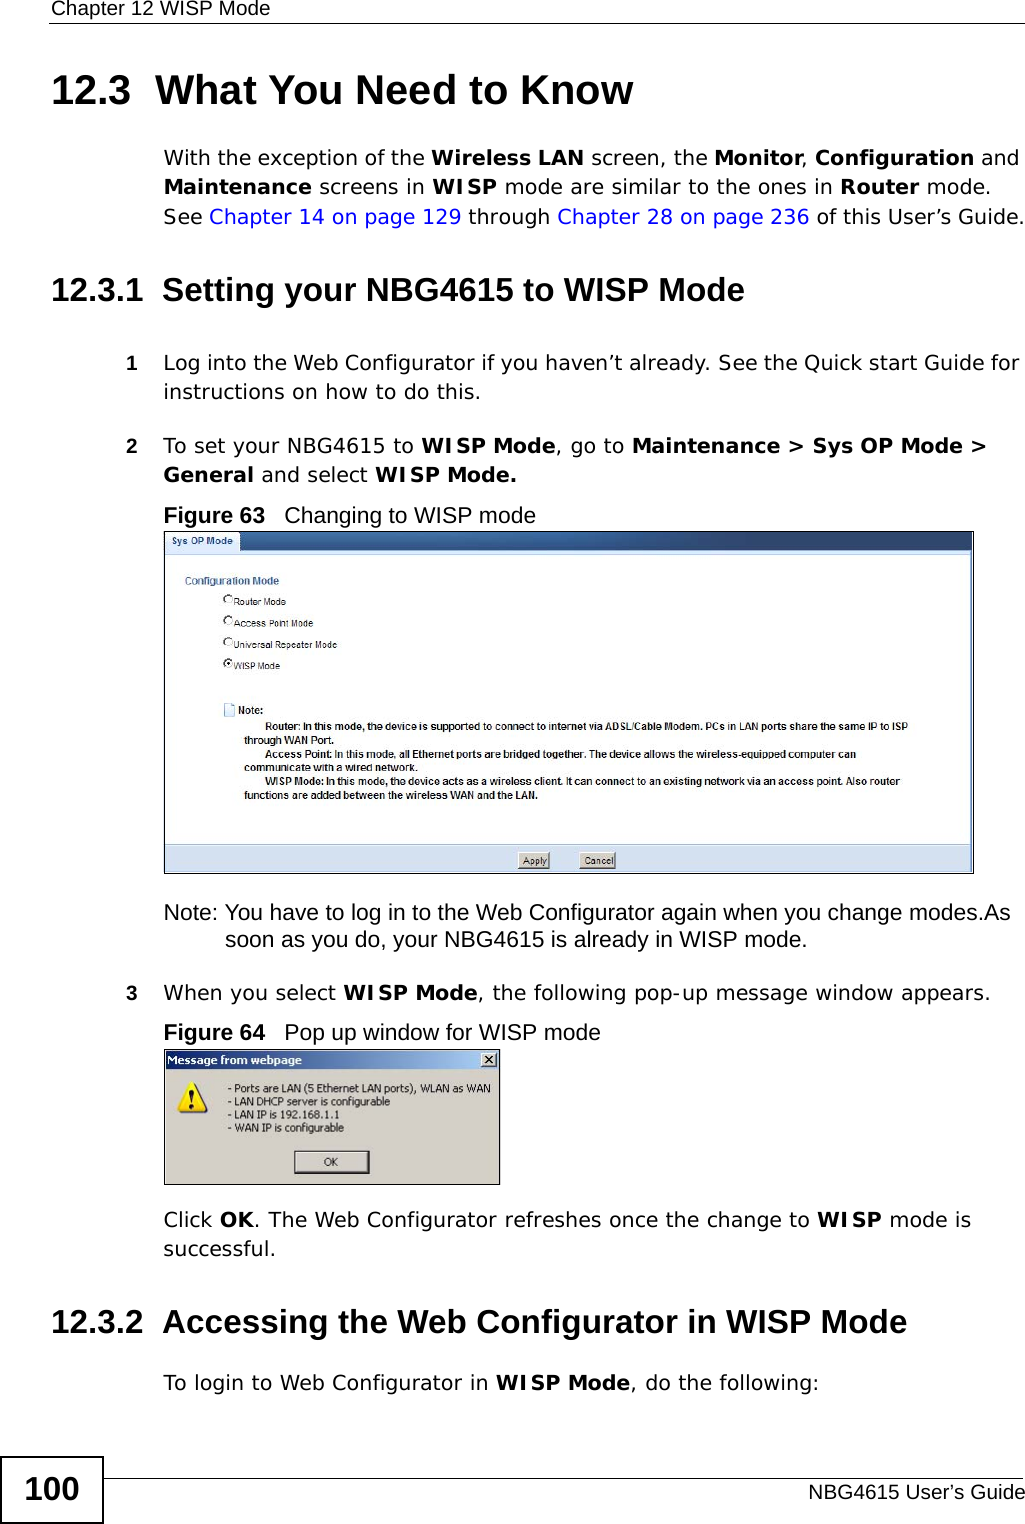 Chapter 12 WISP ModeNBG4615 User’s Guide10012.3  What You Need to KnowWith the exception of the Wireless LAN screen, the Monitor, Configuration and Maintenance screens in WISP mode are similar to the ones in Router mode. See Chapter 14 on page 129 through Chapter 28 on page 236 of this User’s Guide.12.3.1  Setting your NBG4615 to WISP Mode1Log into the Web Configurator if you haven’t already. See the Quick start Guide for instructions on how to do this.2To set your NBG4615 to WISP Mode, go to Maintenance &gt; Sys OP Mode &gt; General and select WISP Mode. Figure 63   Changing to WISP modeNote: You have to log in to the Web Configurator again when you change modes.As soon as you do, your NBG4615 is already in WISP mode.3When you select WISP Mode, the following pop-up message window appears.Figure 64   Pop up window for WISP mode Click OK. The Web Configurator refreshes once the change to WISP mode is successful.12.3.2  Accessing the Web Configurator in WISP ModeTo login to Web Configurator in WISP Mode, do the following: